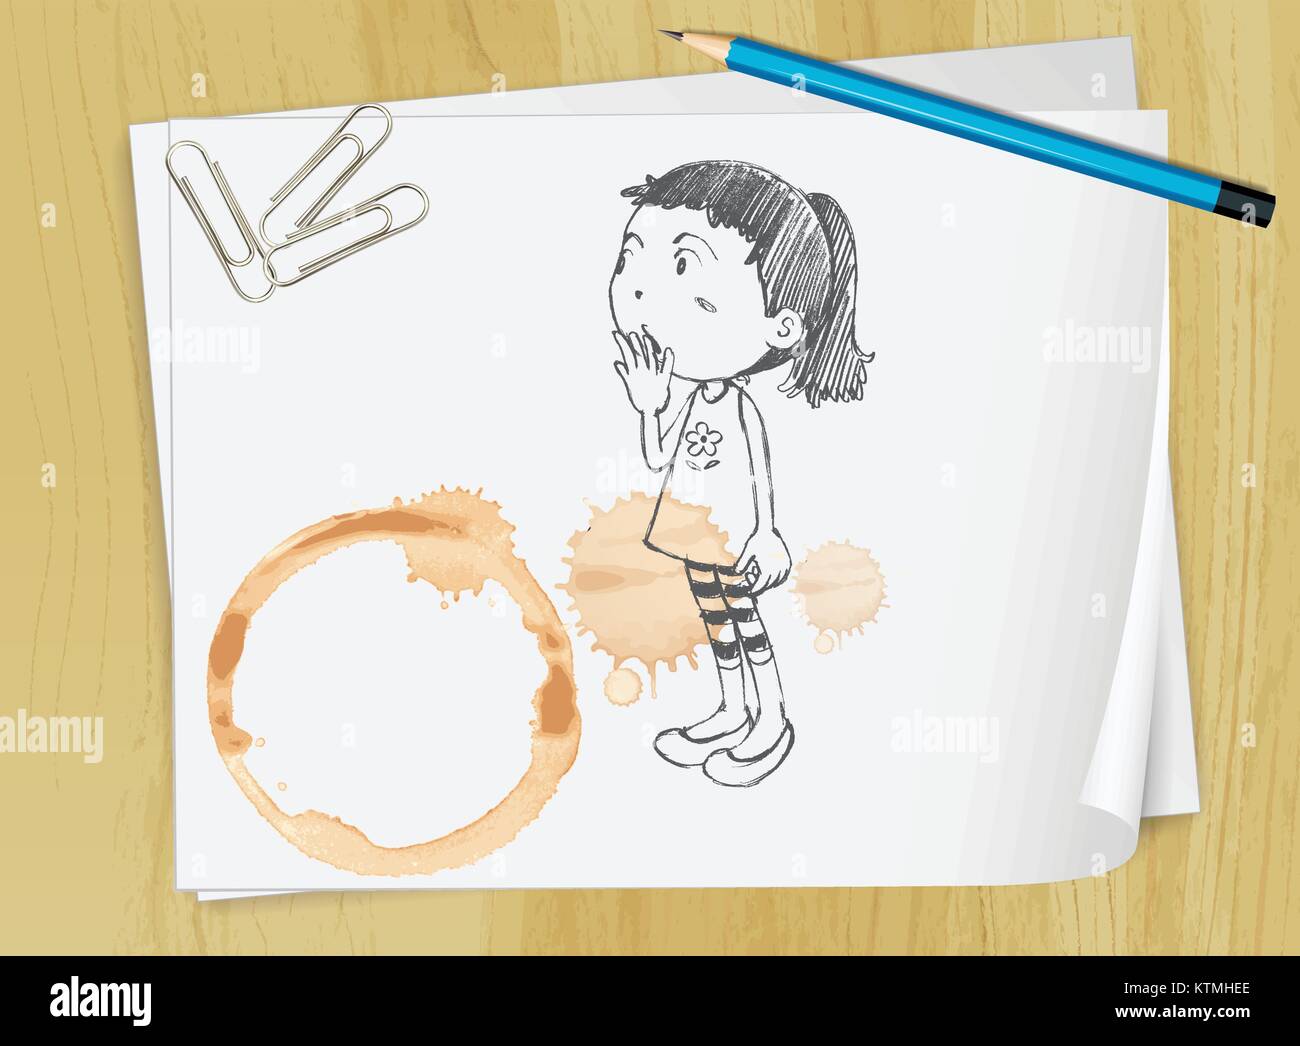 Illustration of a child sketched on paper Stock Vector